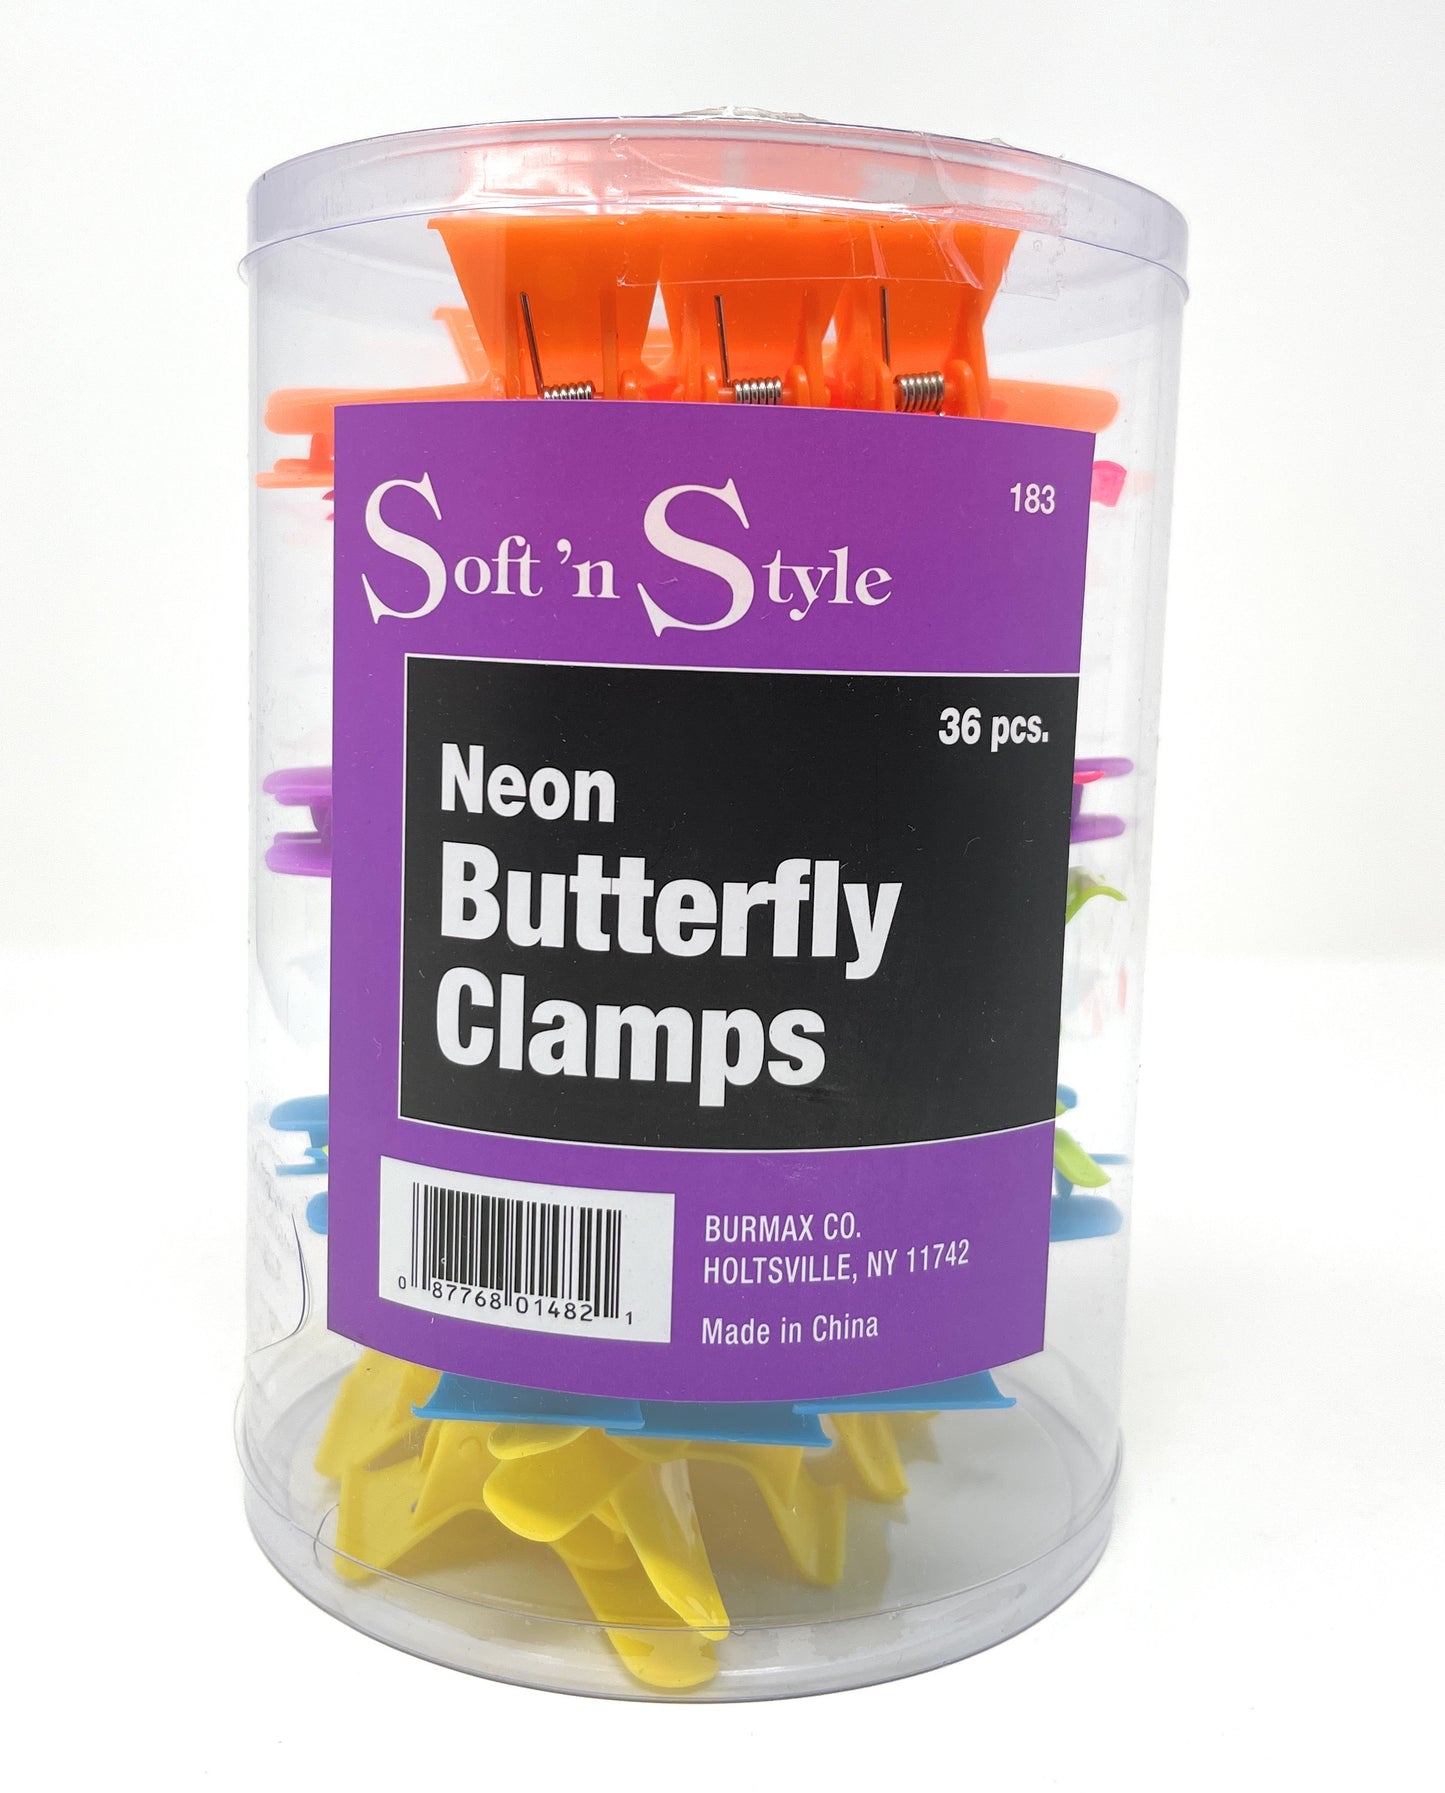 Soft’n Style neon Butterfly hair clips clamps for styling sectioning 36 Pieces.